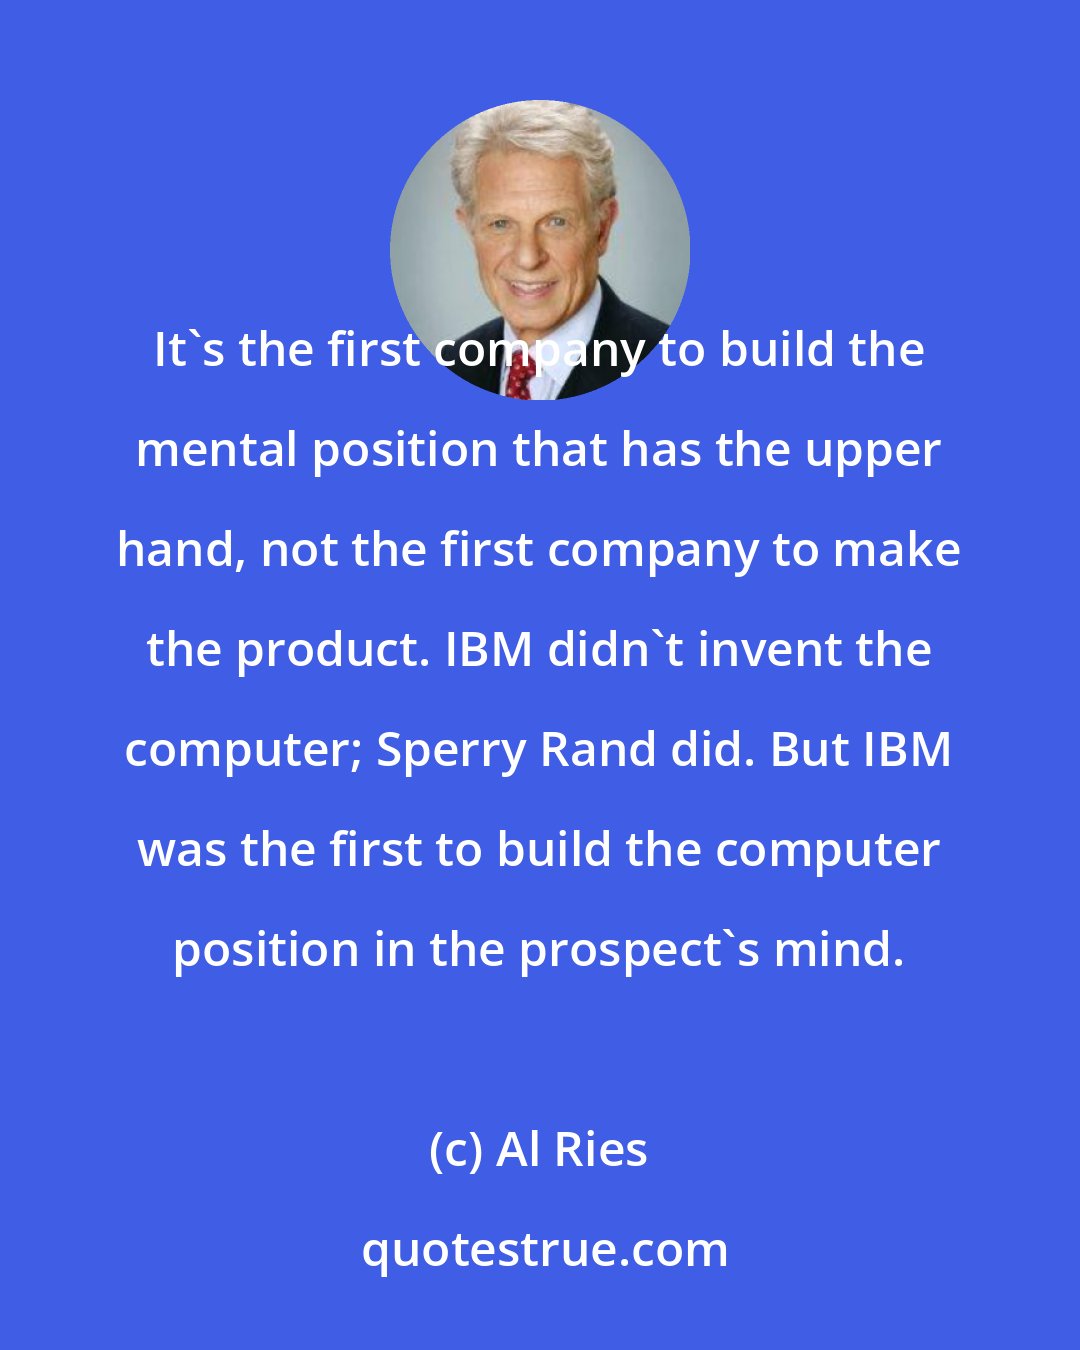 Al Ries: It's the first company to build the mental position that has the upper hand, not the first company to make the product. IBM didn't invent the computer; Sperry Rand did. But IBM was the first to build the computer position in the prospect's mind.